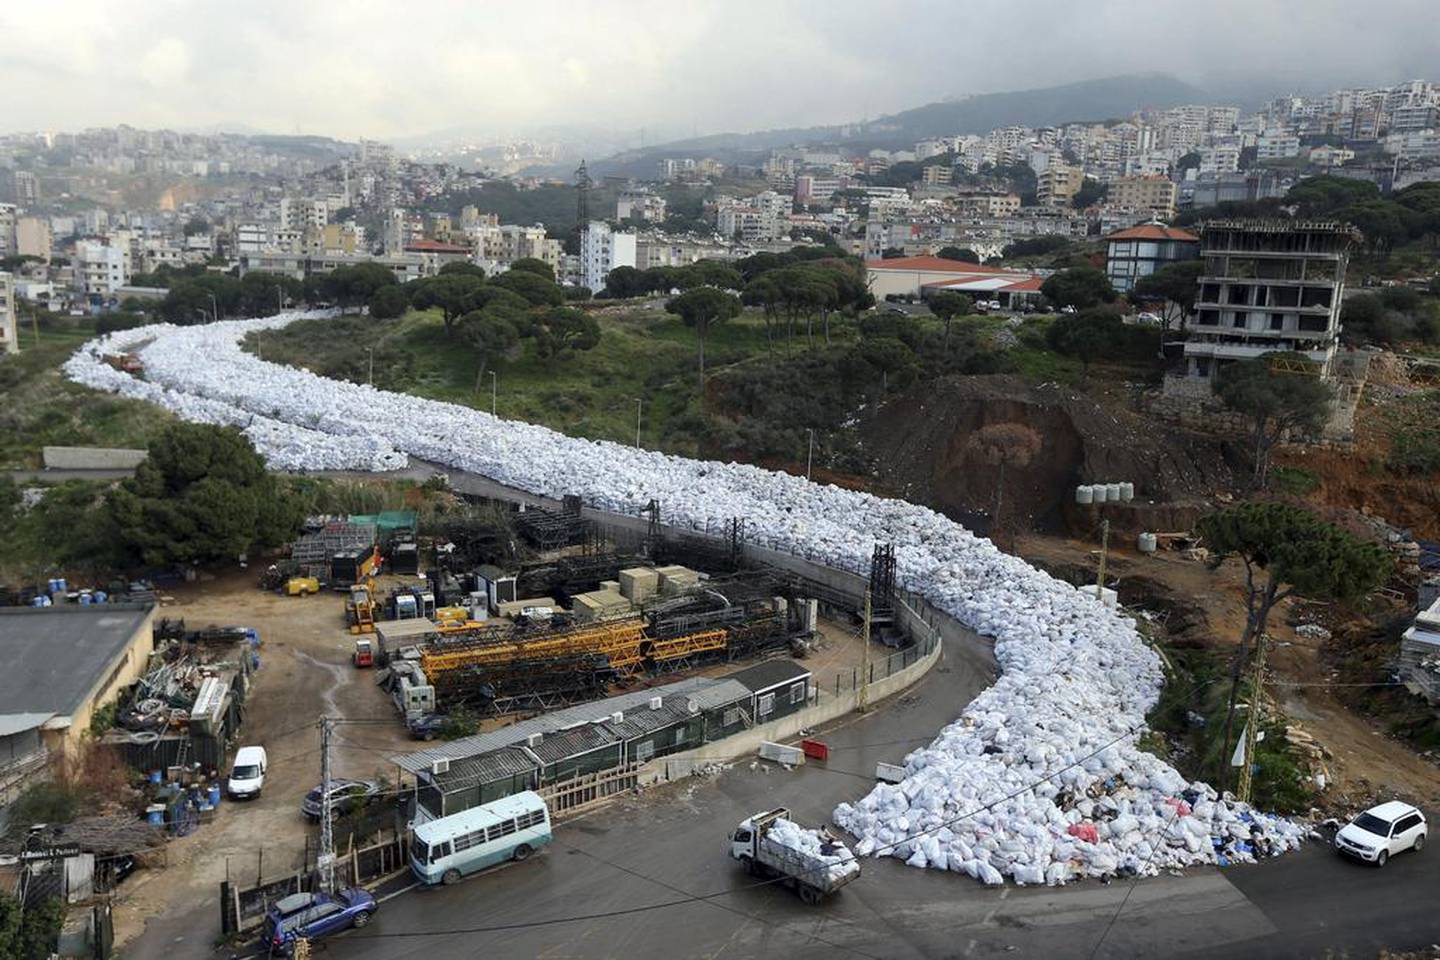 Packed rubbish bags line a street in Jdeideh near Beirut after landfill sites were closed in 2016. REUTERS